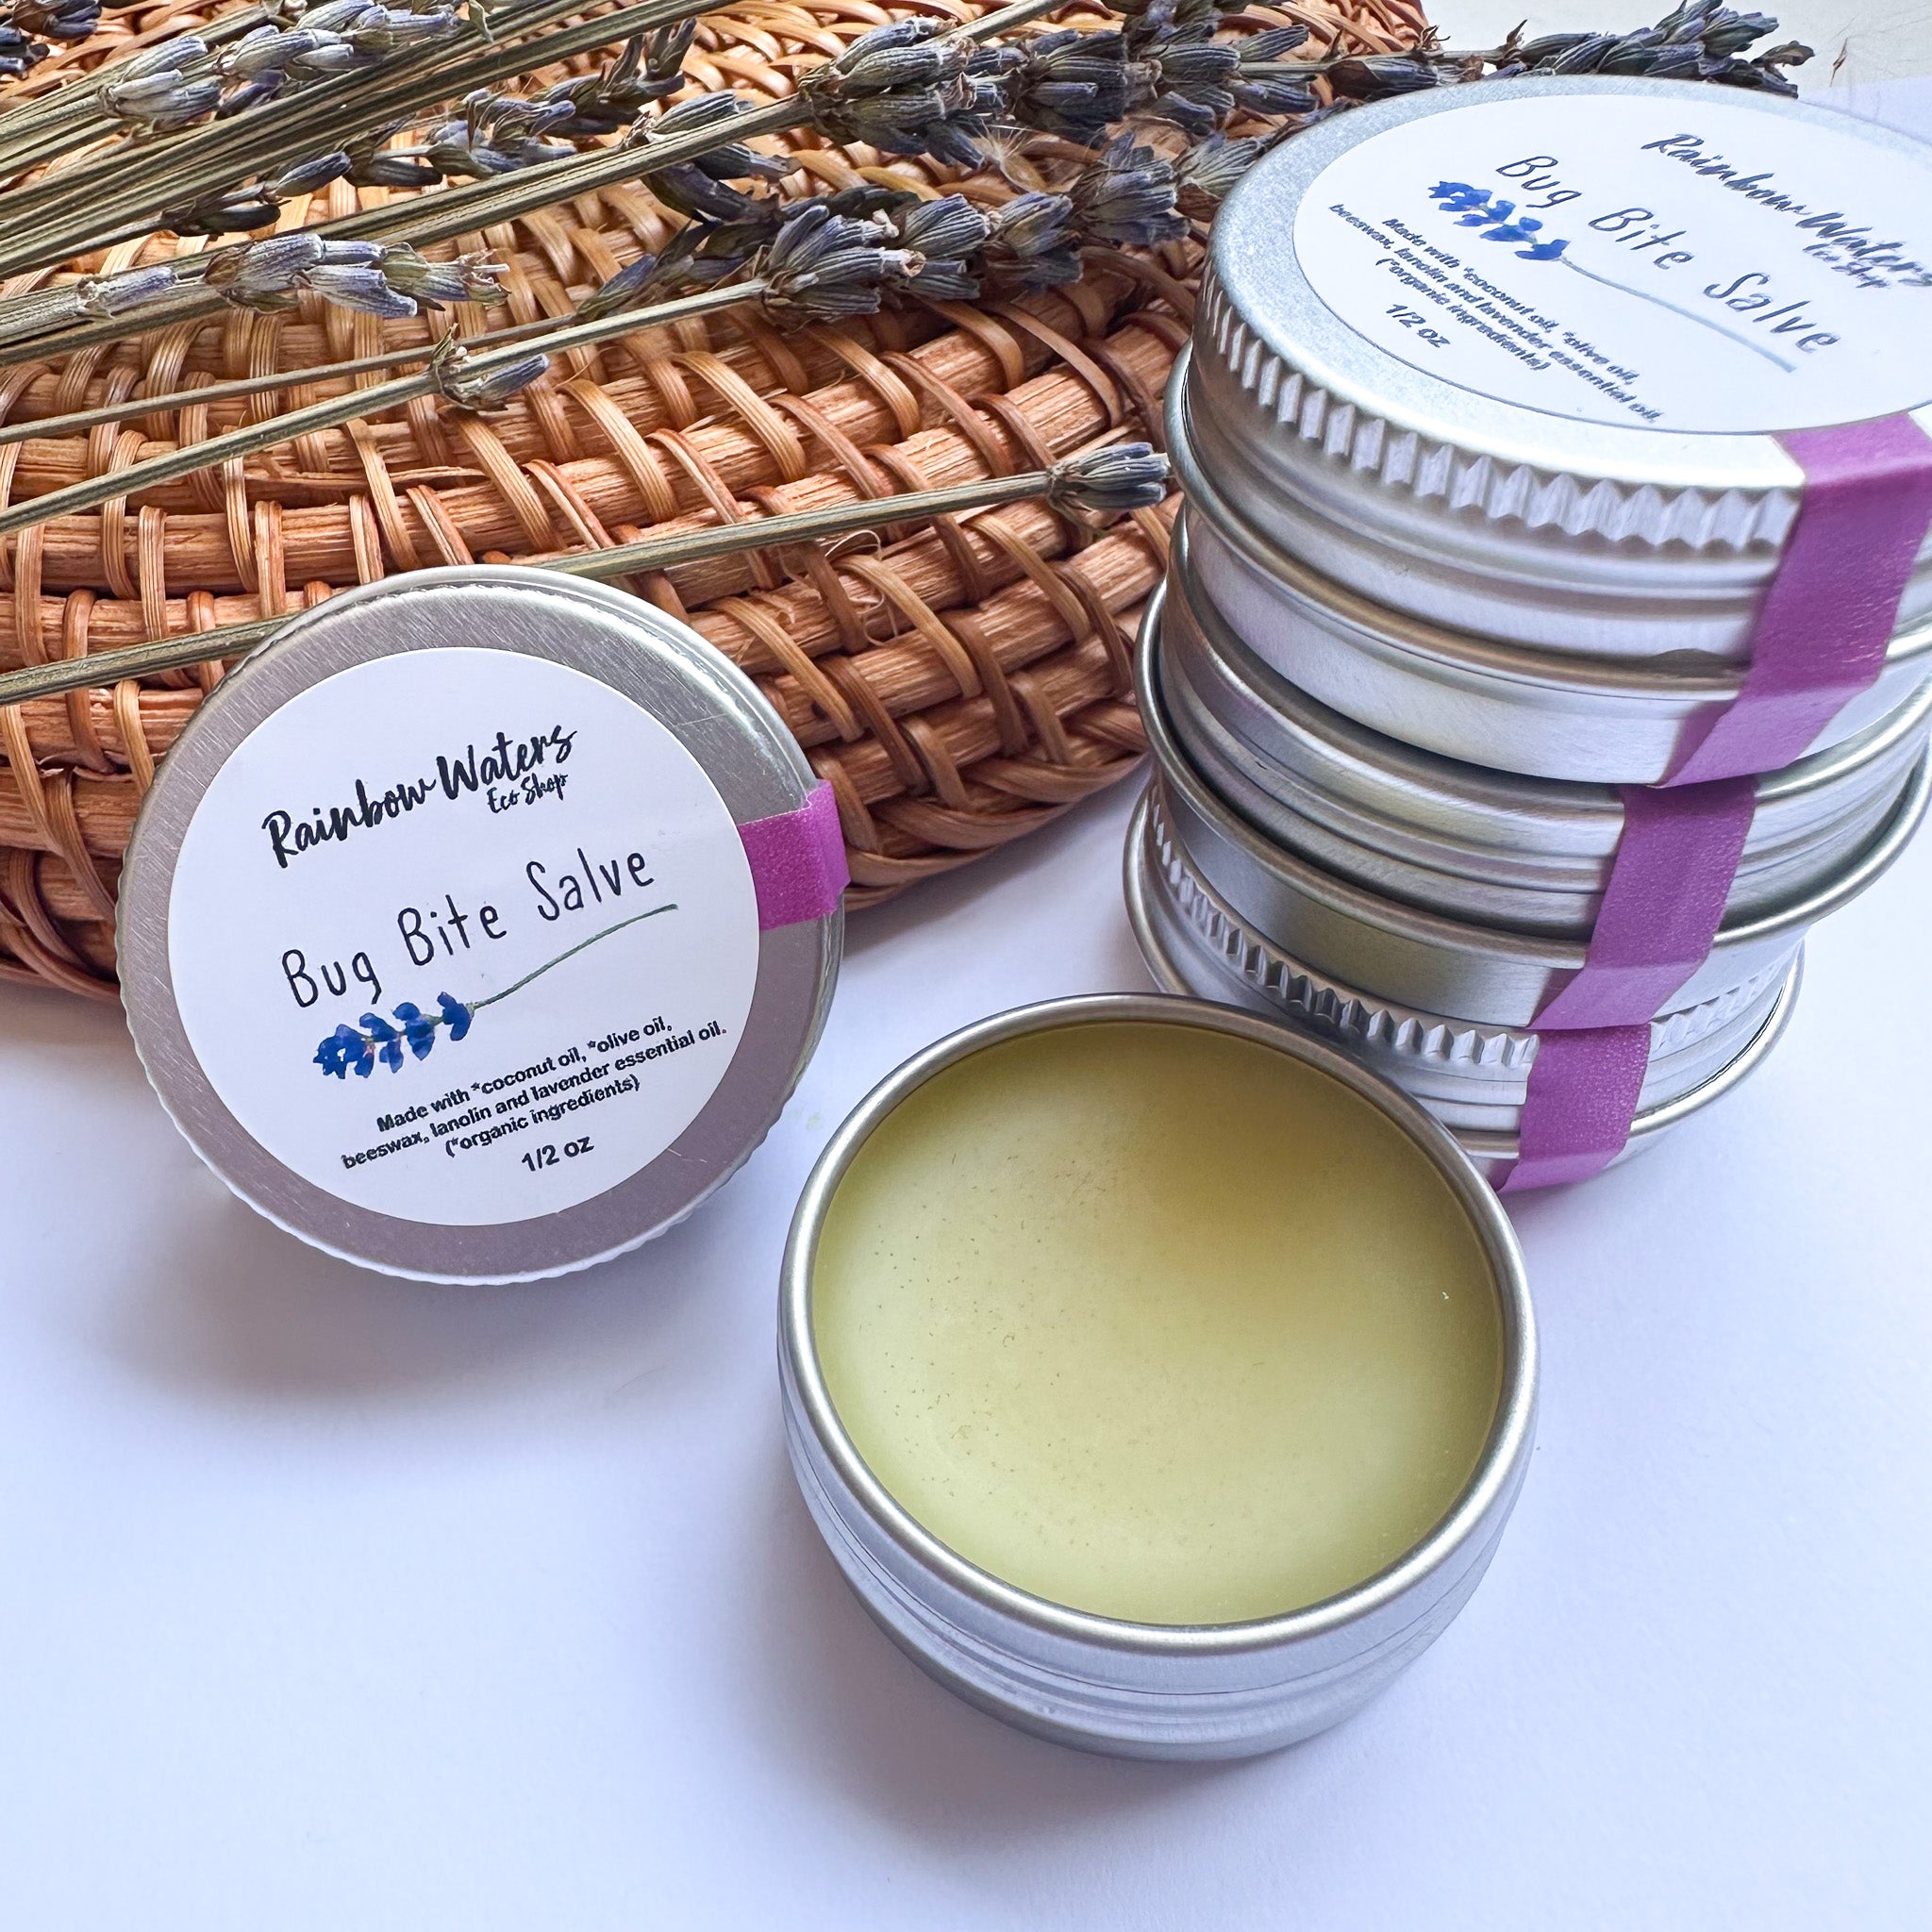 Bug Bite Salve, with soothing lavender, 1/2 oz tin